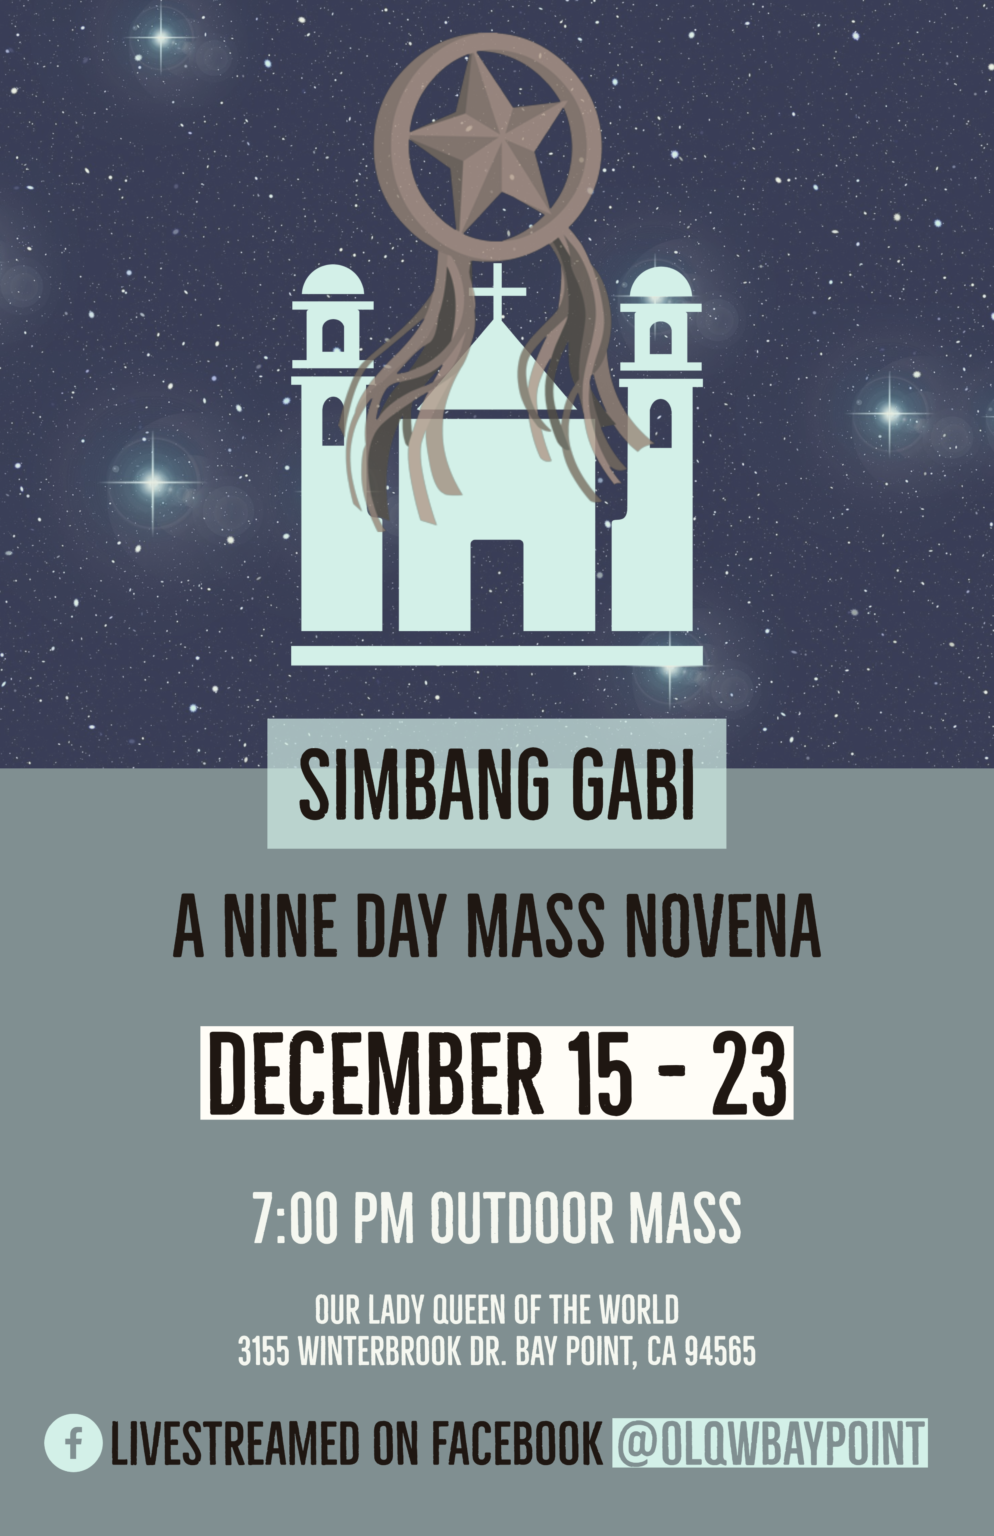 Simbang Gabi Filipino 9-Day Novena – Our Lady Queen of the World | Bay Point, CA